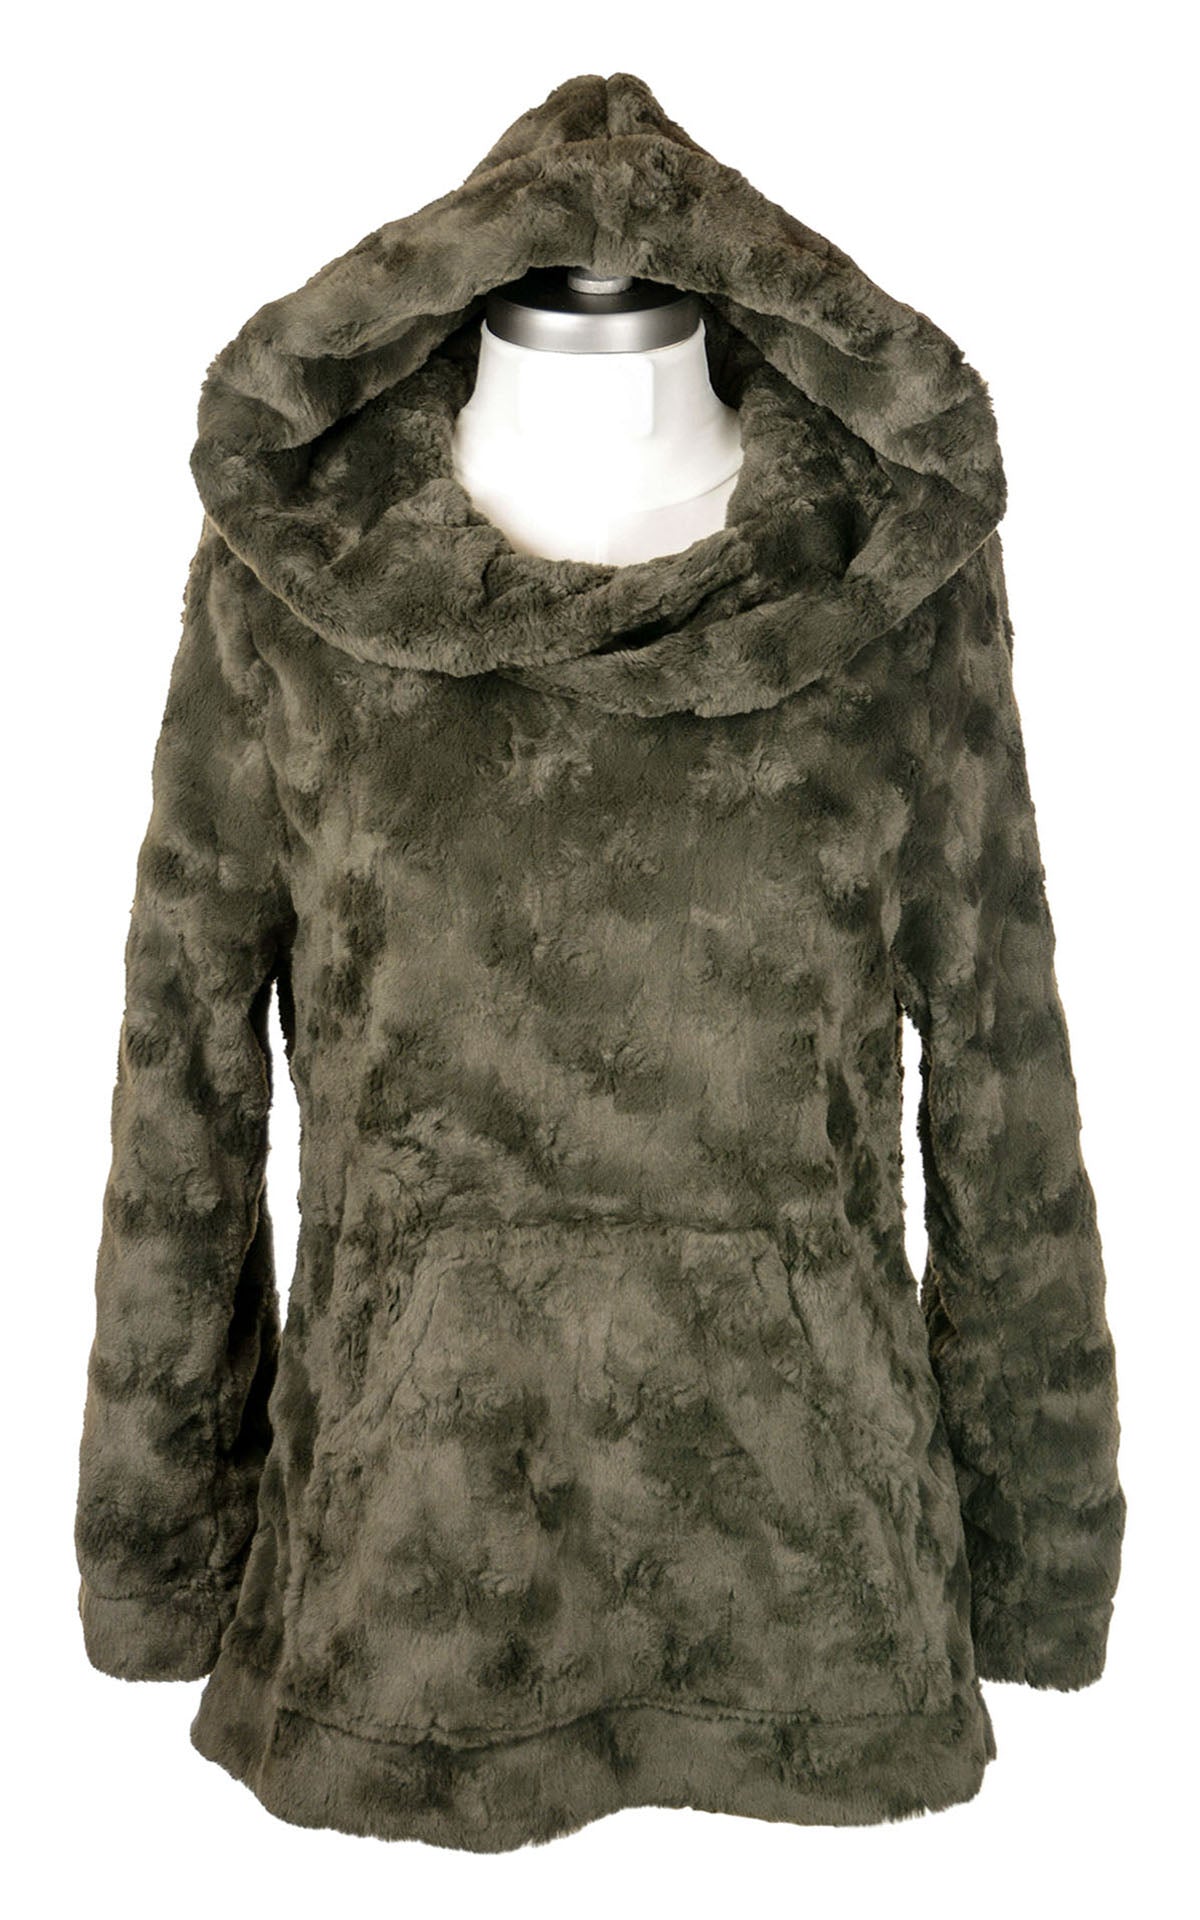 Hooded Lounger Tunic Cuddly Faux Fur in Army by Pandemonium Millinery | Handmade in Seattle WA USA  